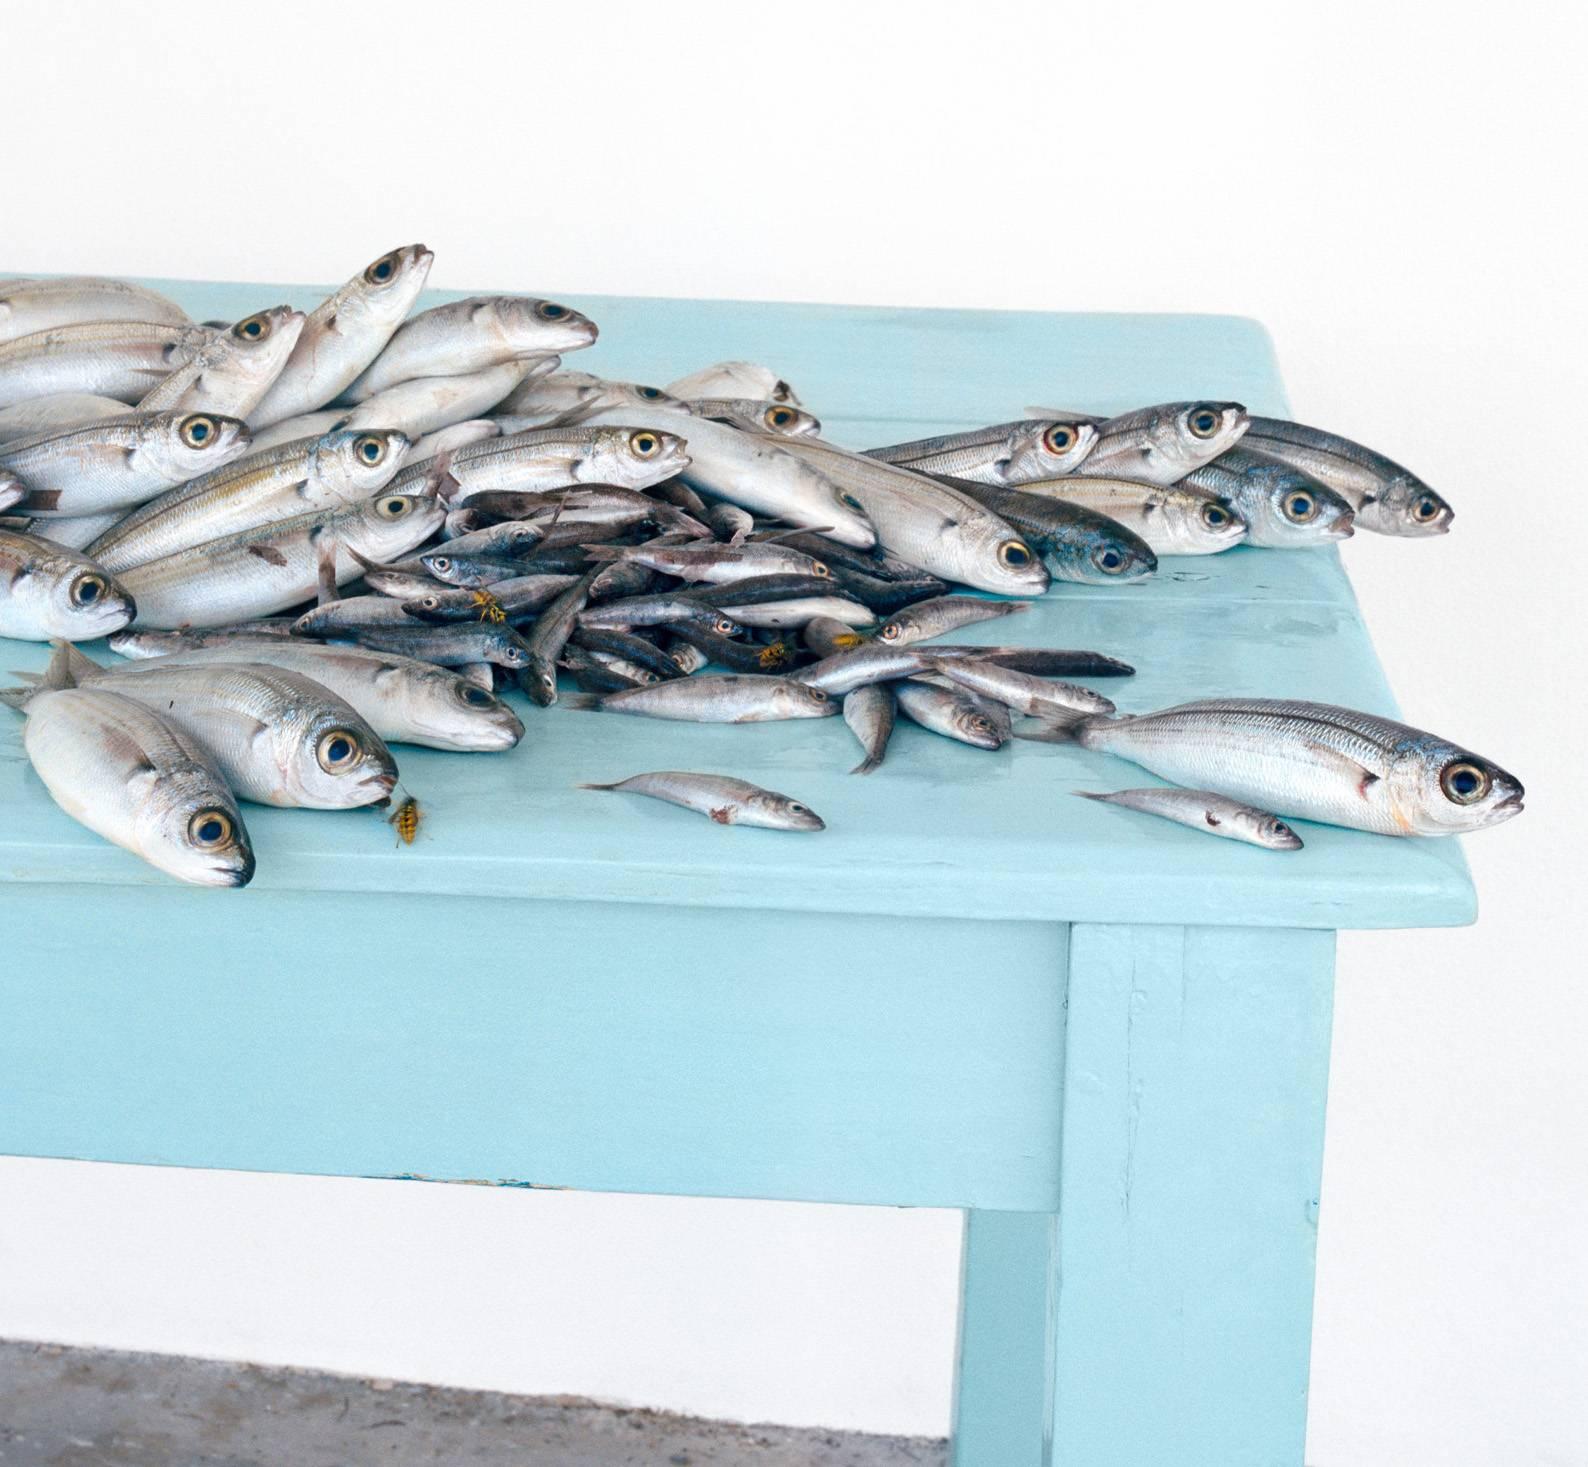 Fish on Blue (Still Life of Silver Fish on Farm Table) - Photograph by David Halliday